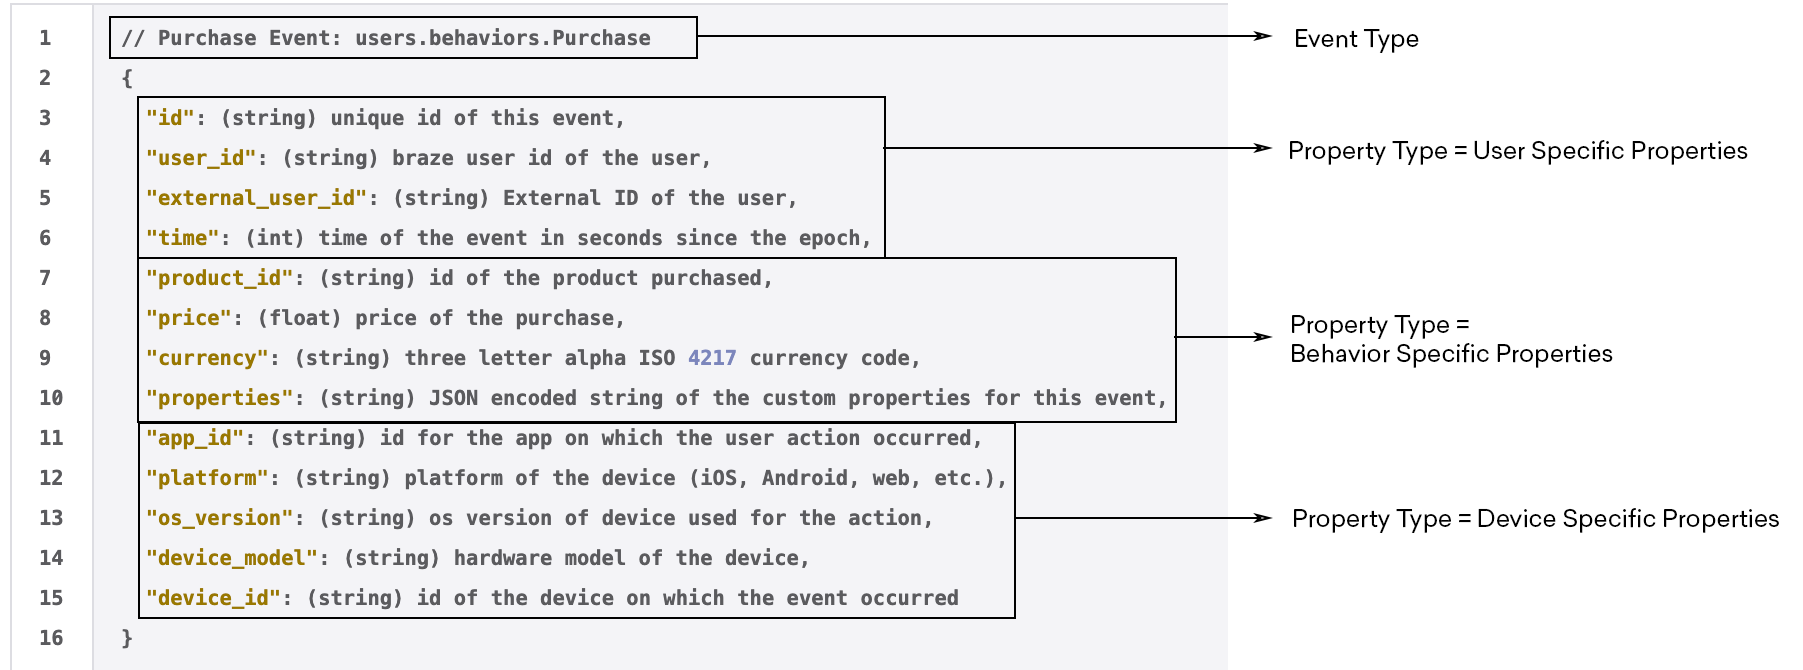 Breakdown of a user event showing a purchase event with the listed properties grouped by user-specific properties, behavior-specific properties, and device-specific properties